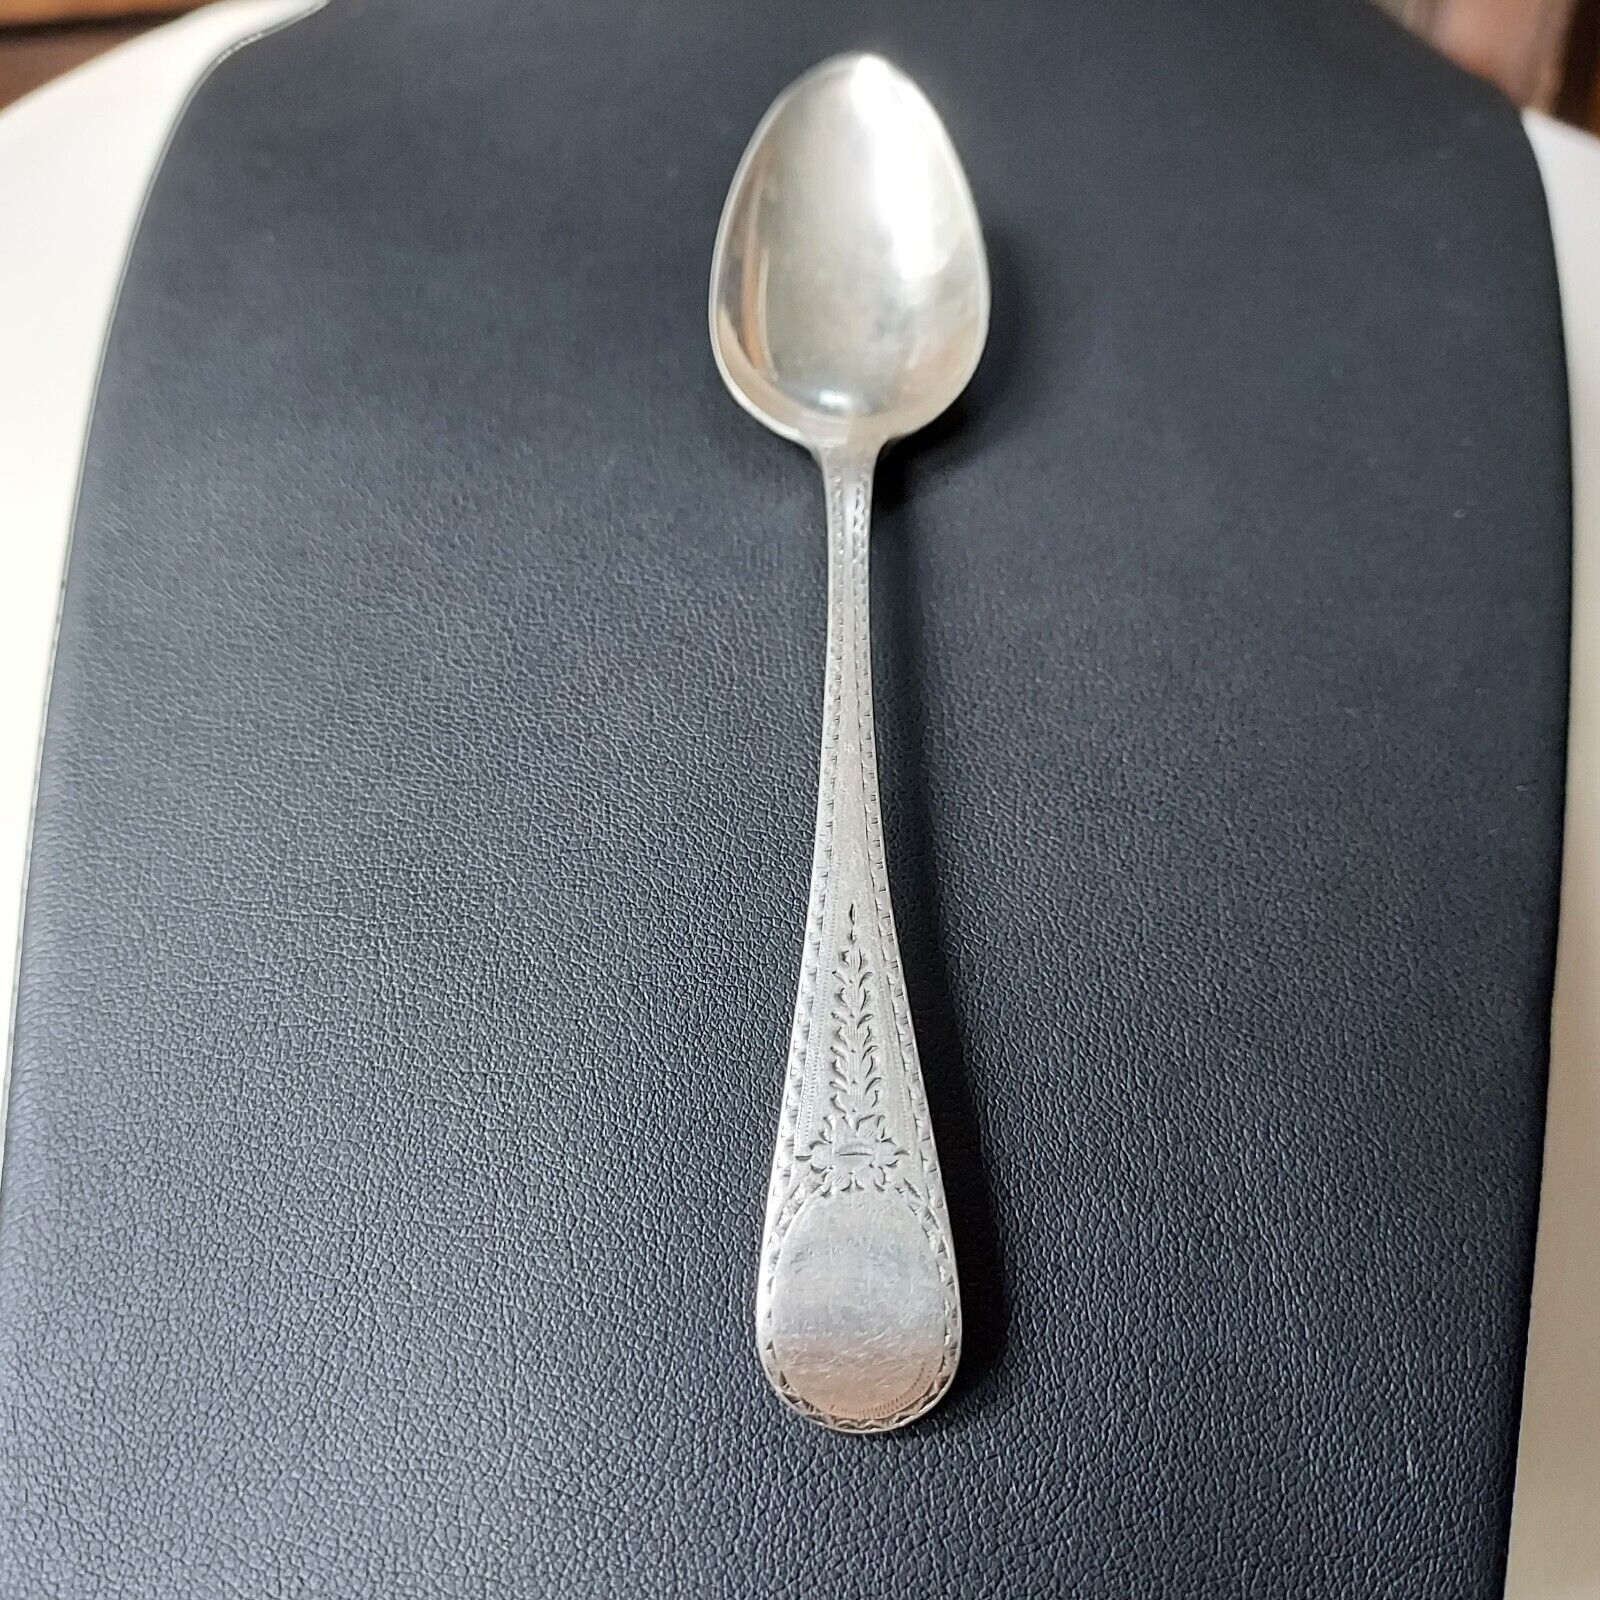 Antique Valuations: Antique 1799 English Georgian Sterling Silver 925 Demitasse Spoon